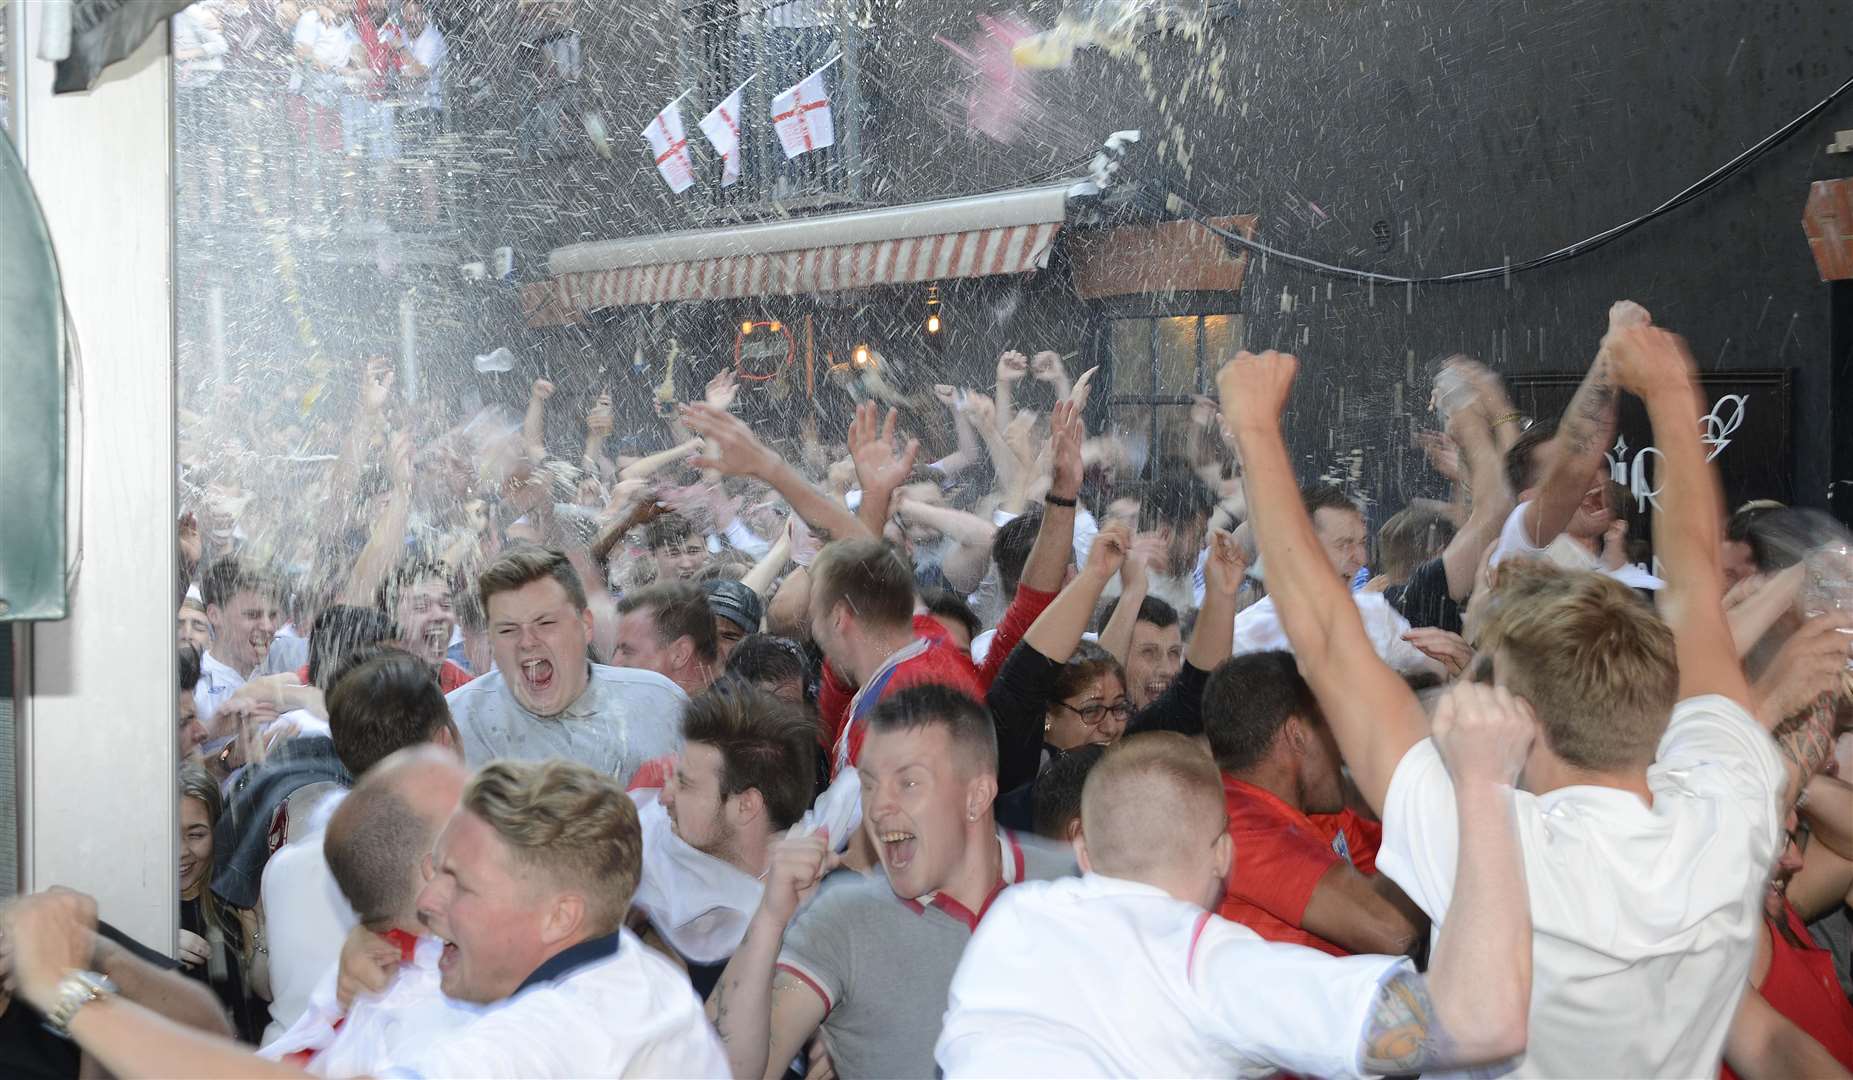 Scenes of joy in Maidstone as England take the lead